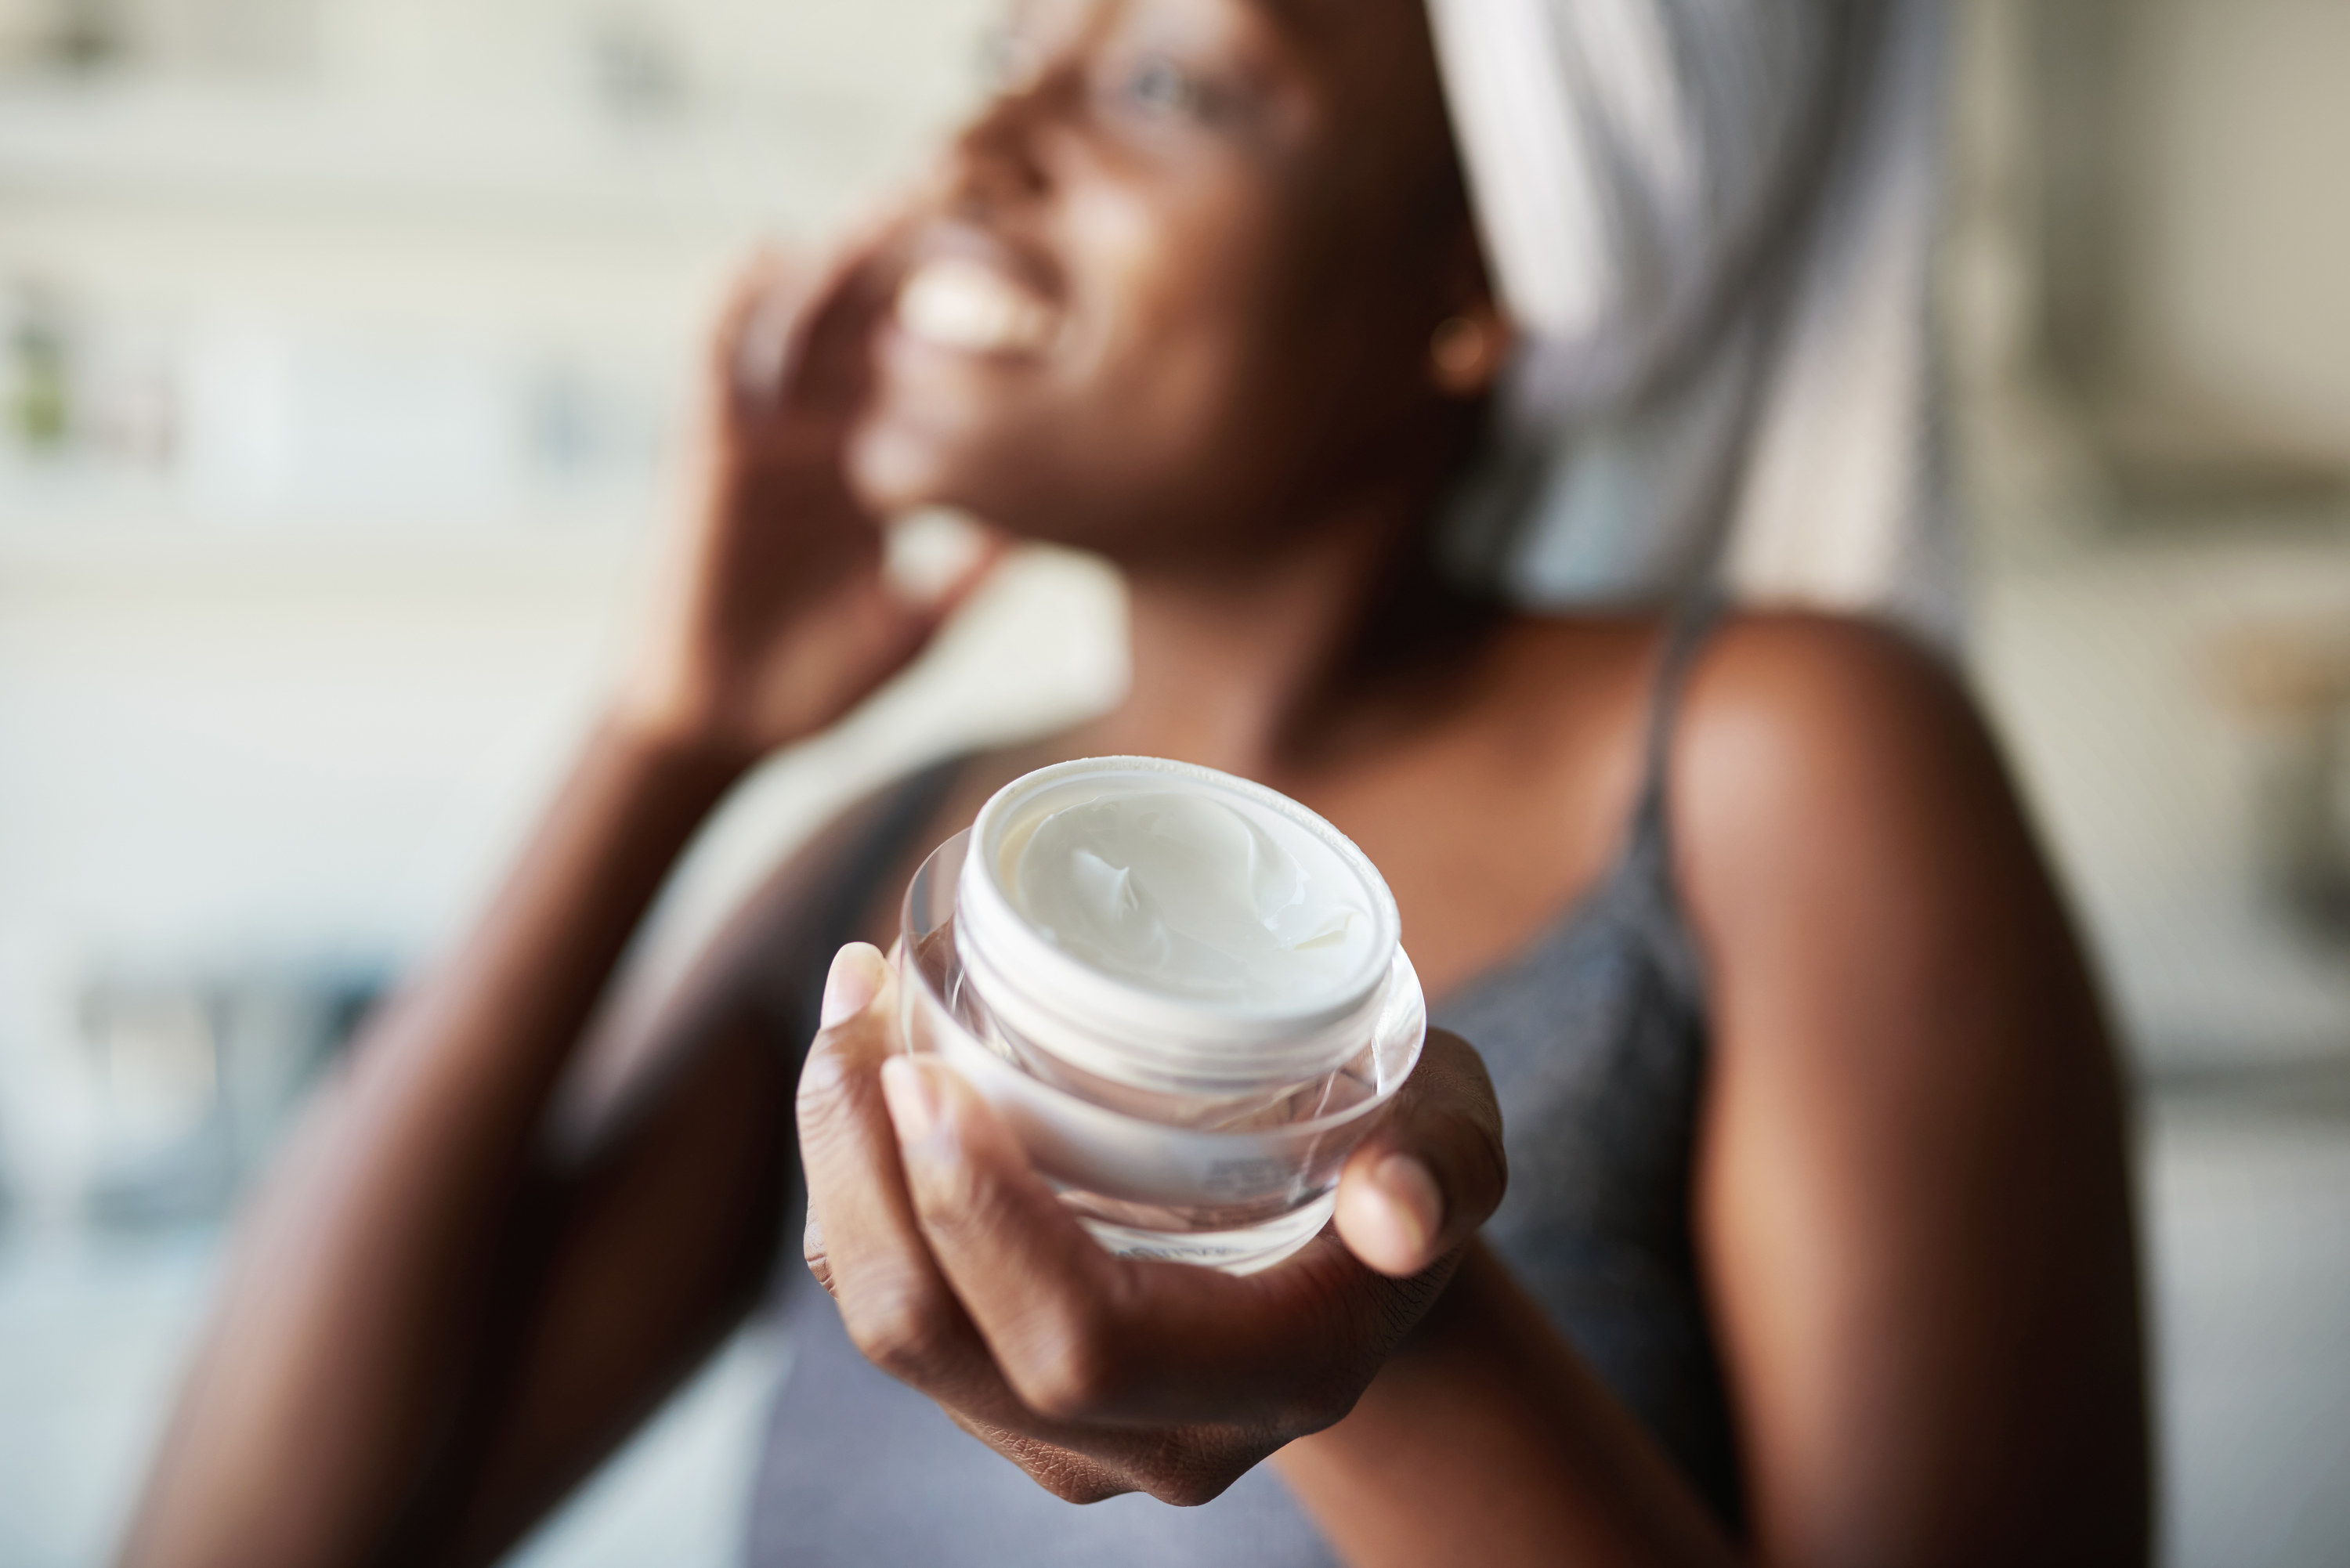 A woman holding a jar of moisturizer and is applying it in the background